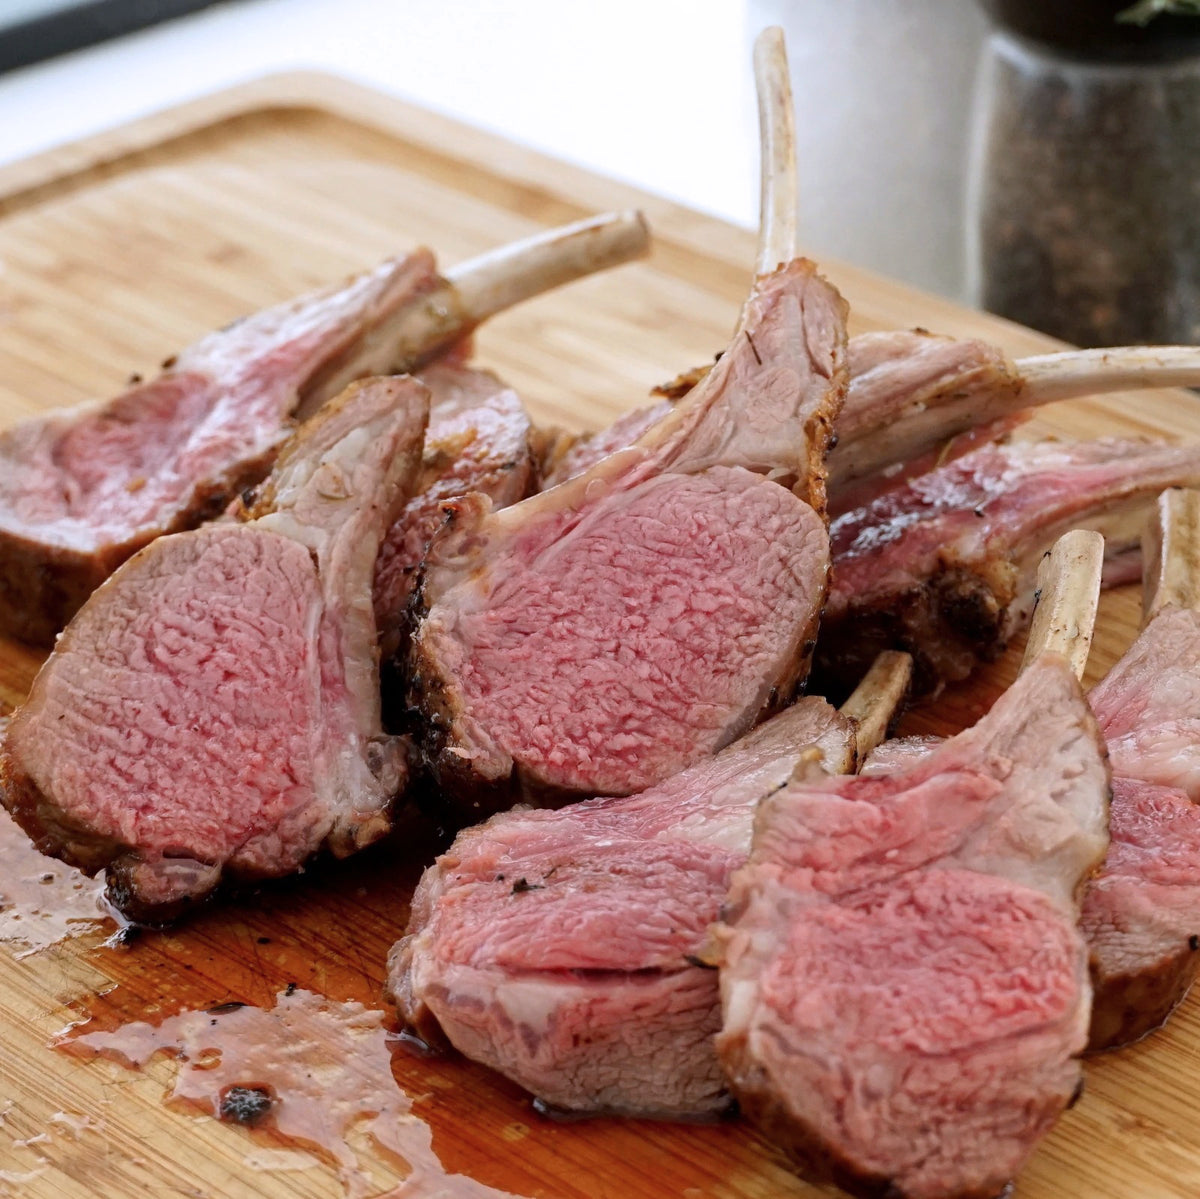 Free-Range Frenched Lamb Rack from New Zealand (450g) - Horizon Farms